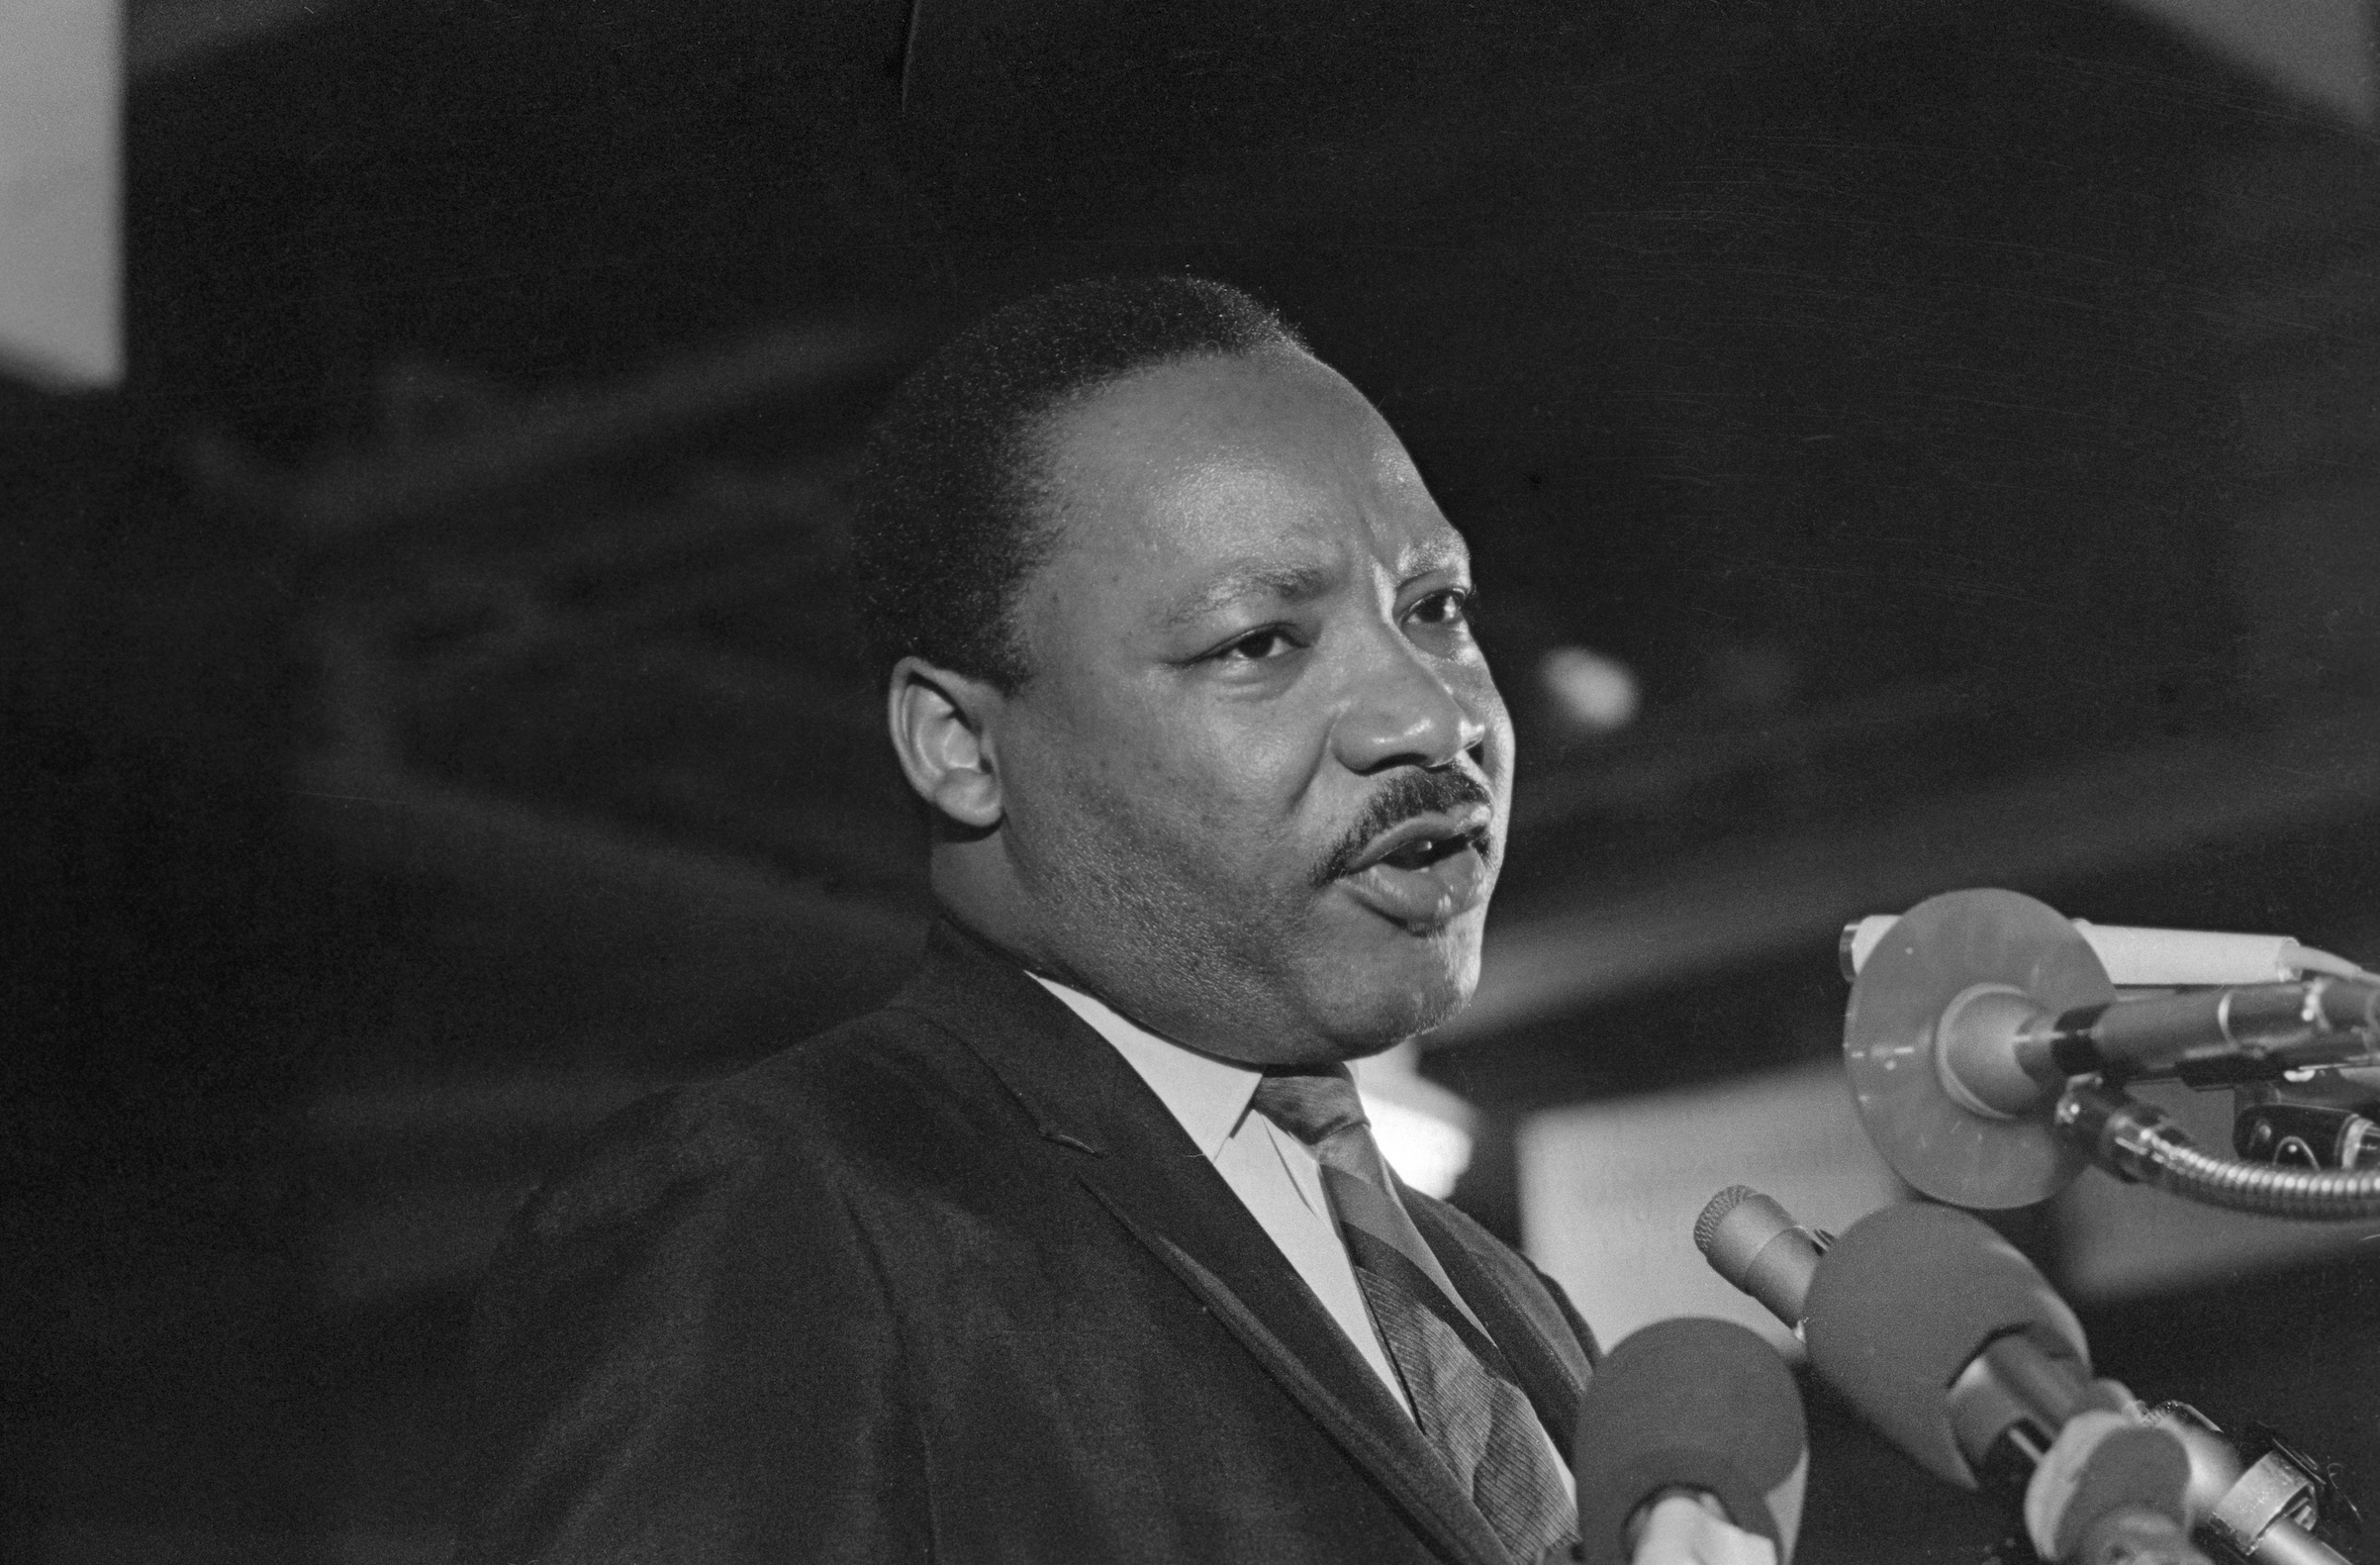 Dr. Martin Luther King addresses some 2,000 people on the eve of his death—April 3, 1968—giving the speech "I've been to the mountaintop." (Bettmann/Getty Images)